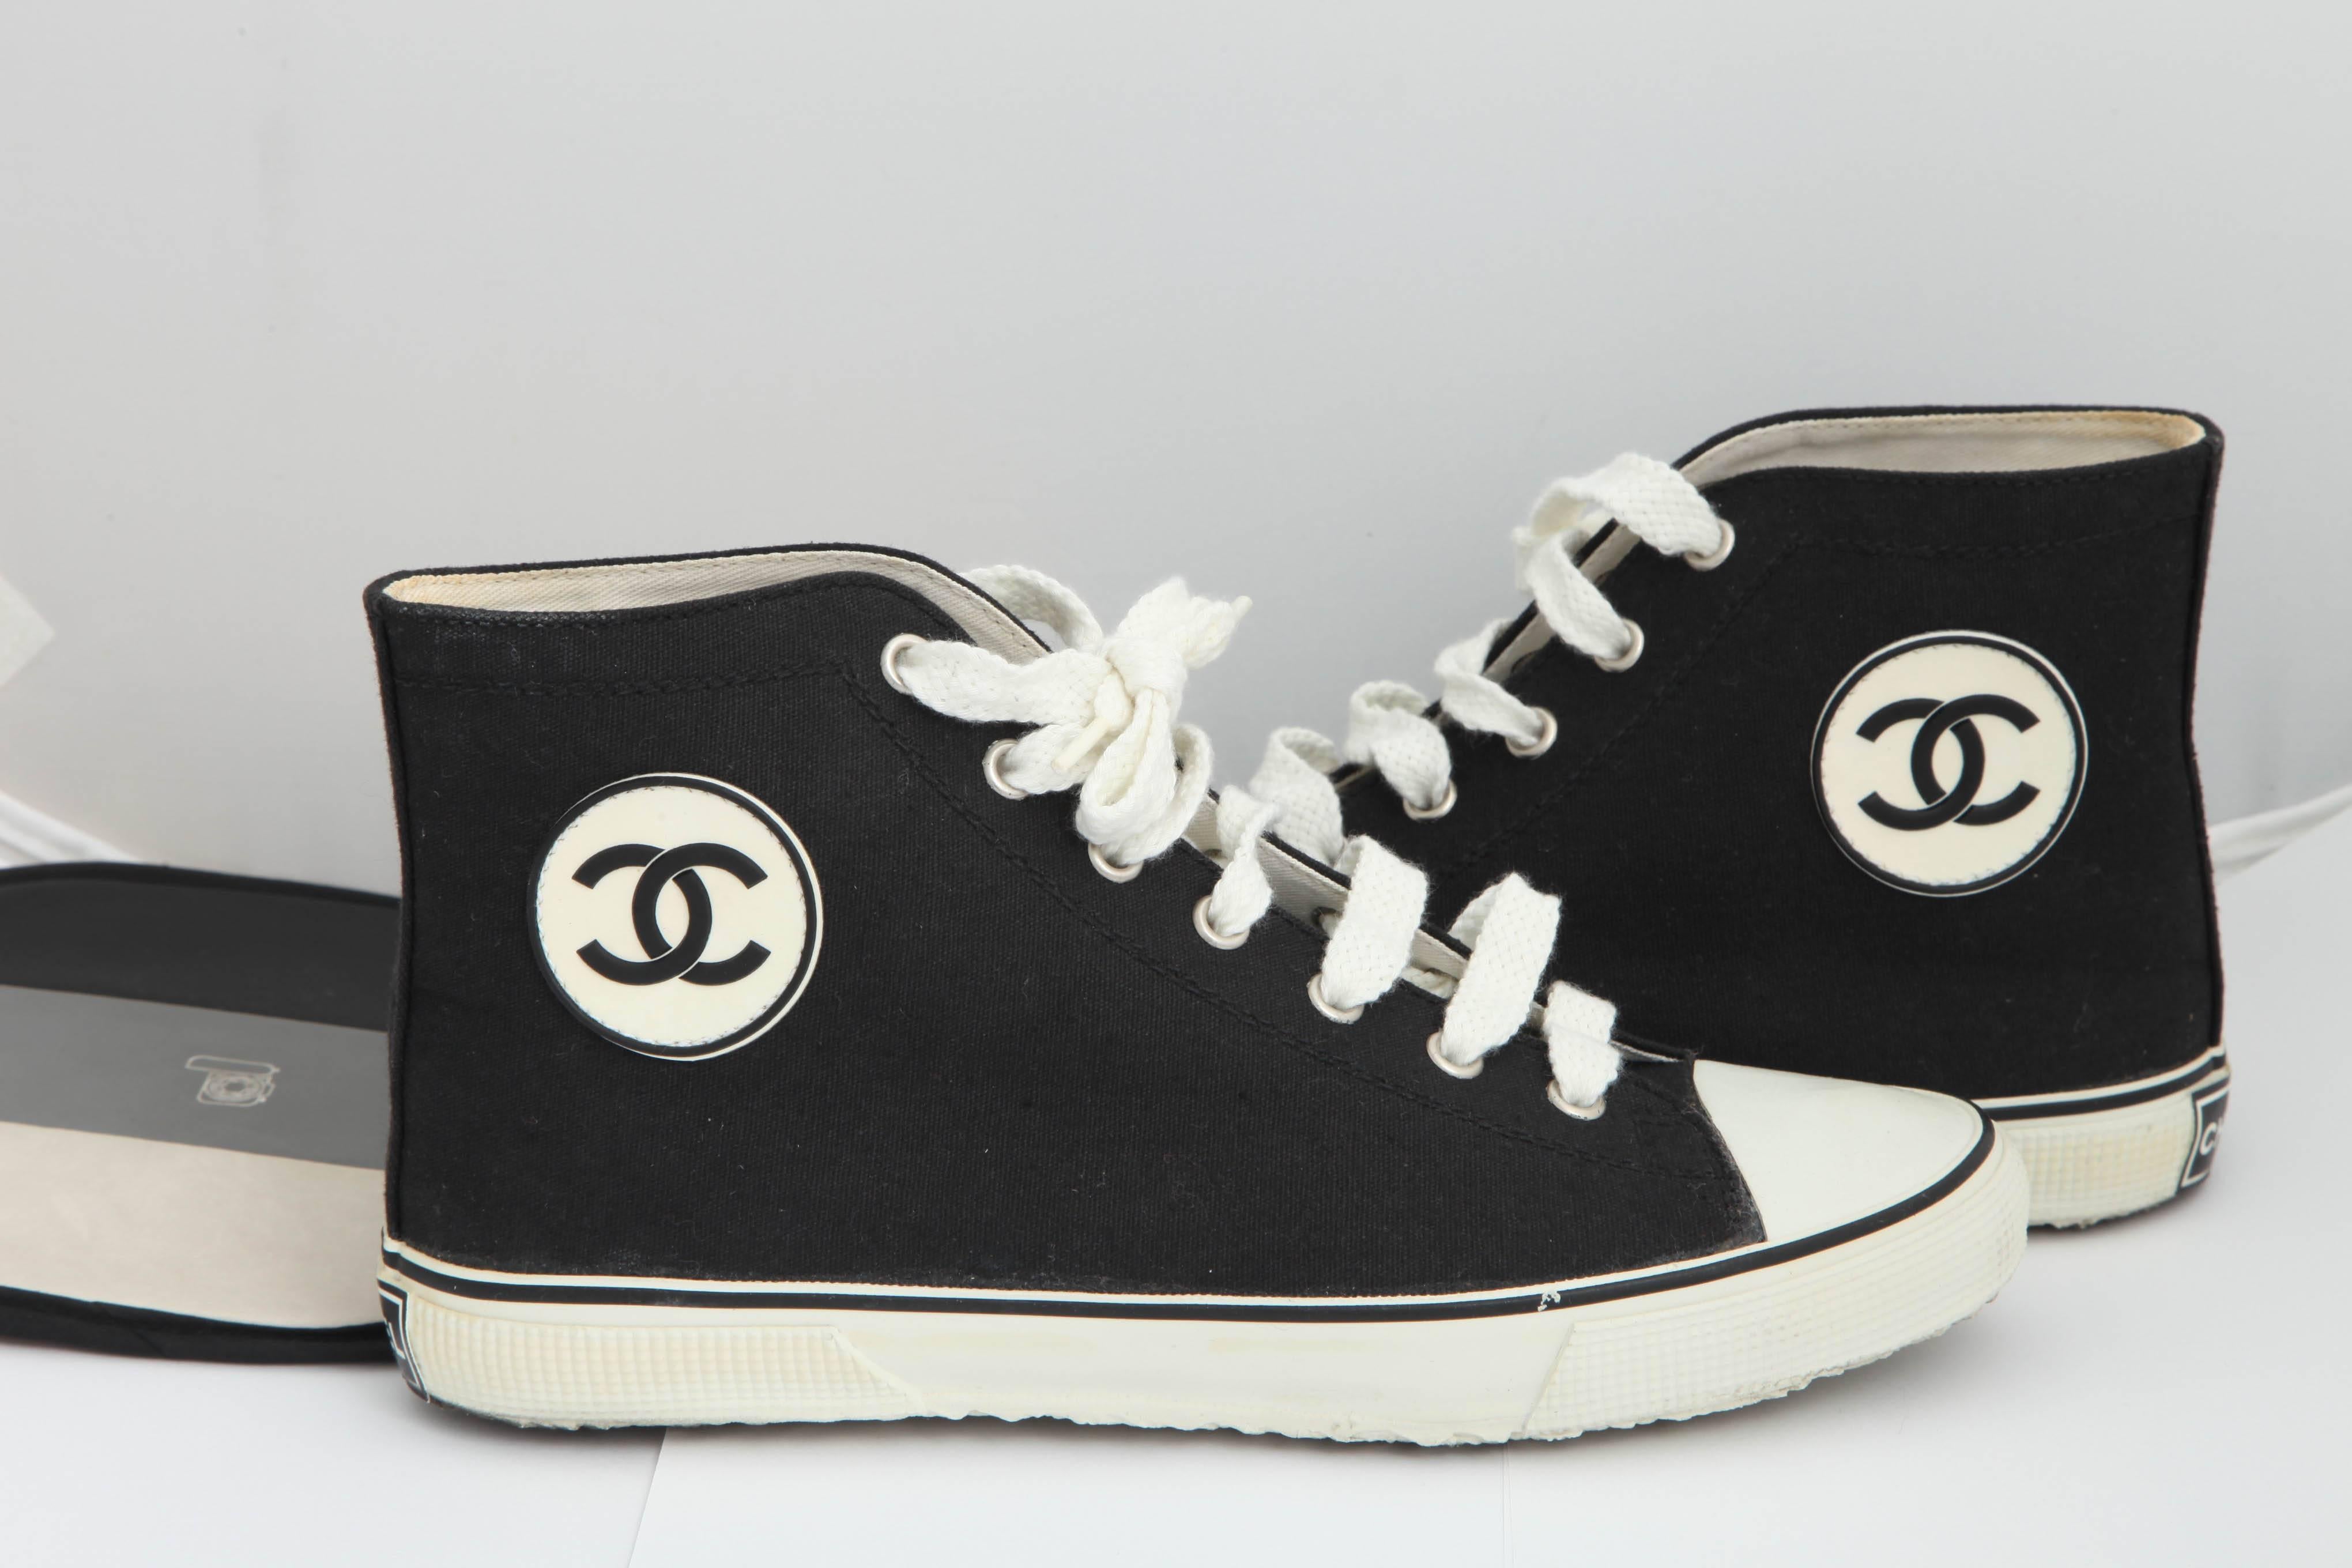 Very rare converse style sneakers in black and white.
Size 37.